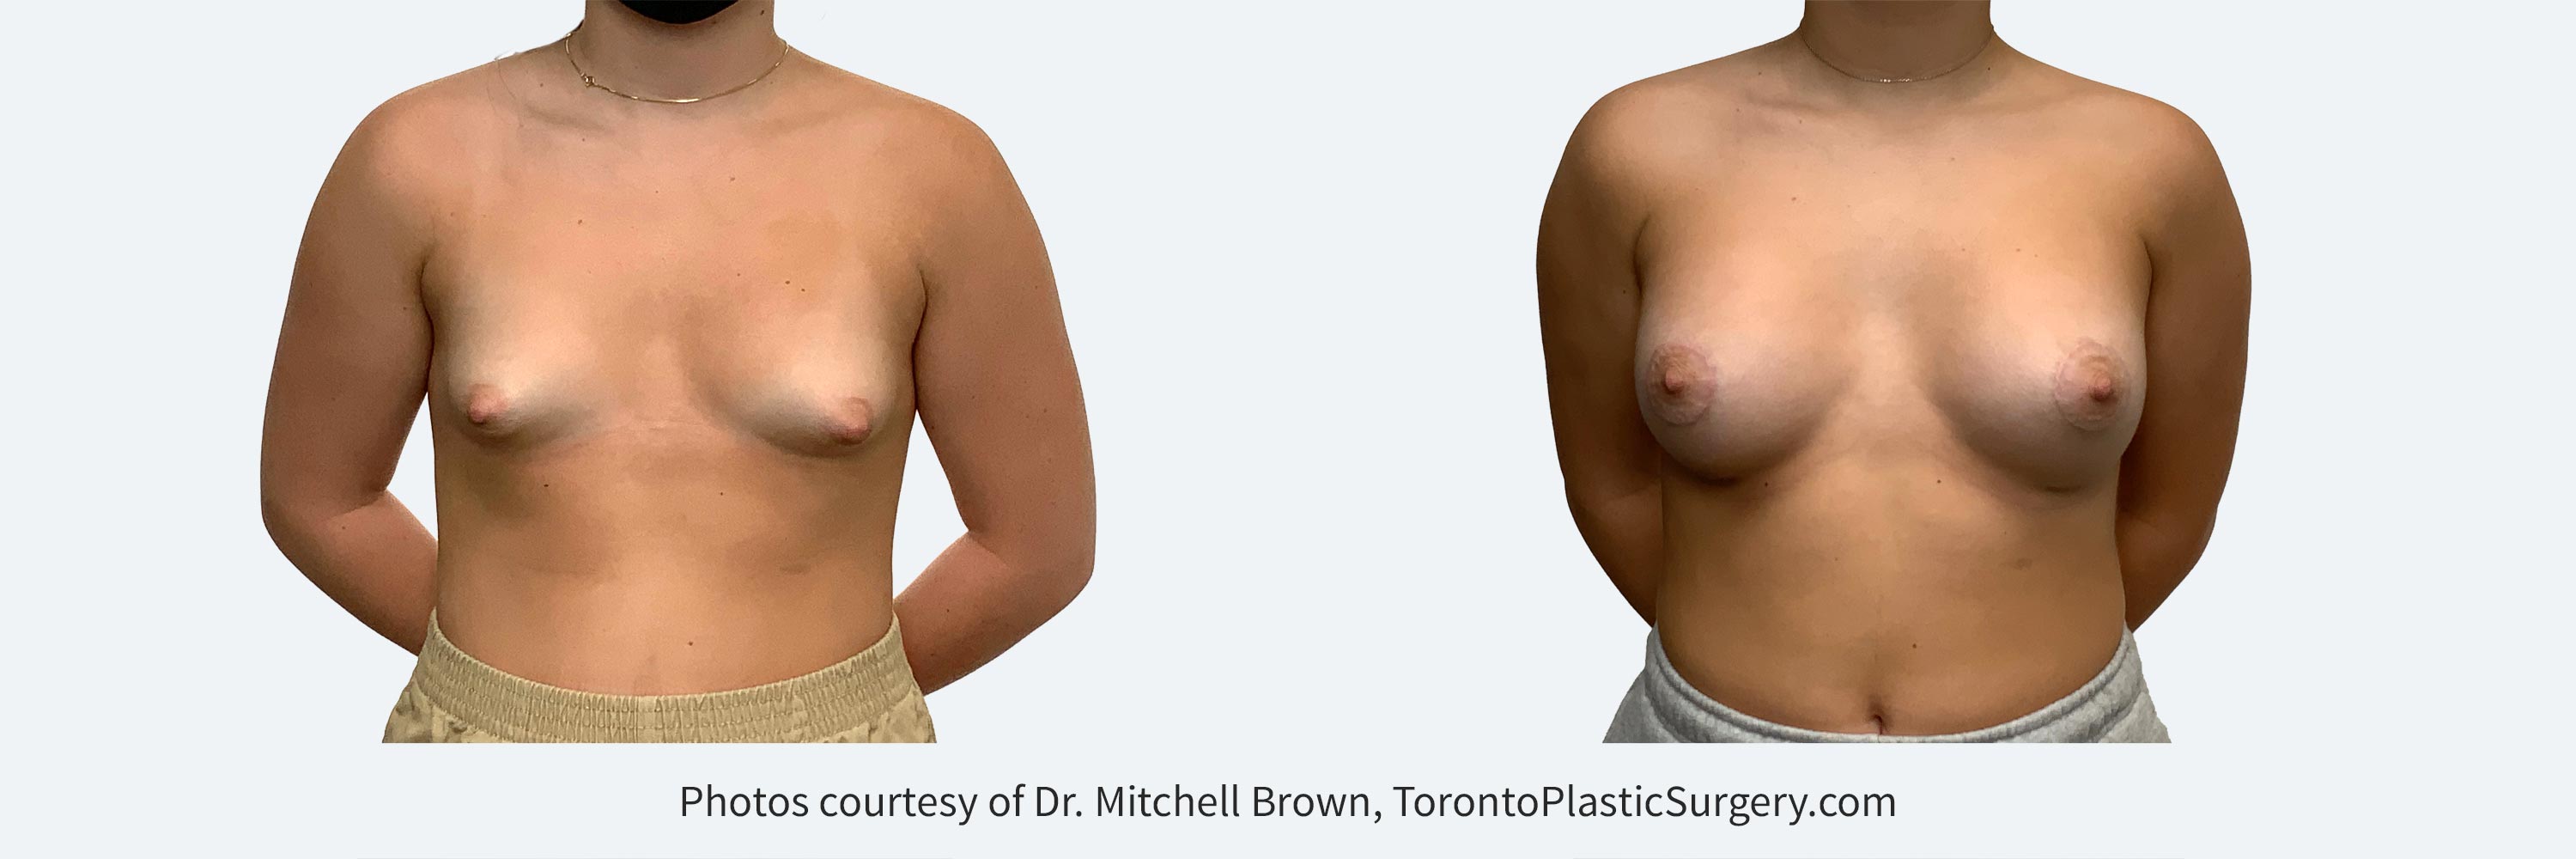 18Y with tuberous breasts treated with 275cc implants and an areola lift. Before and After 6 months.